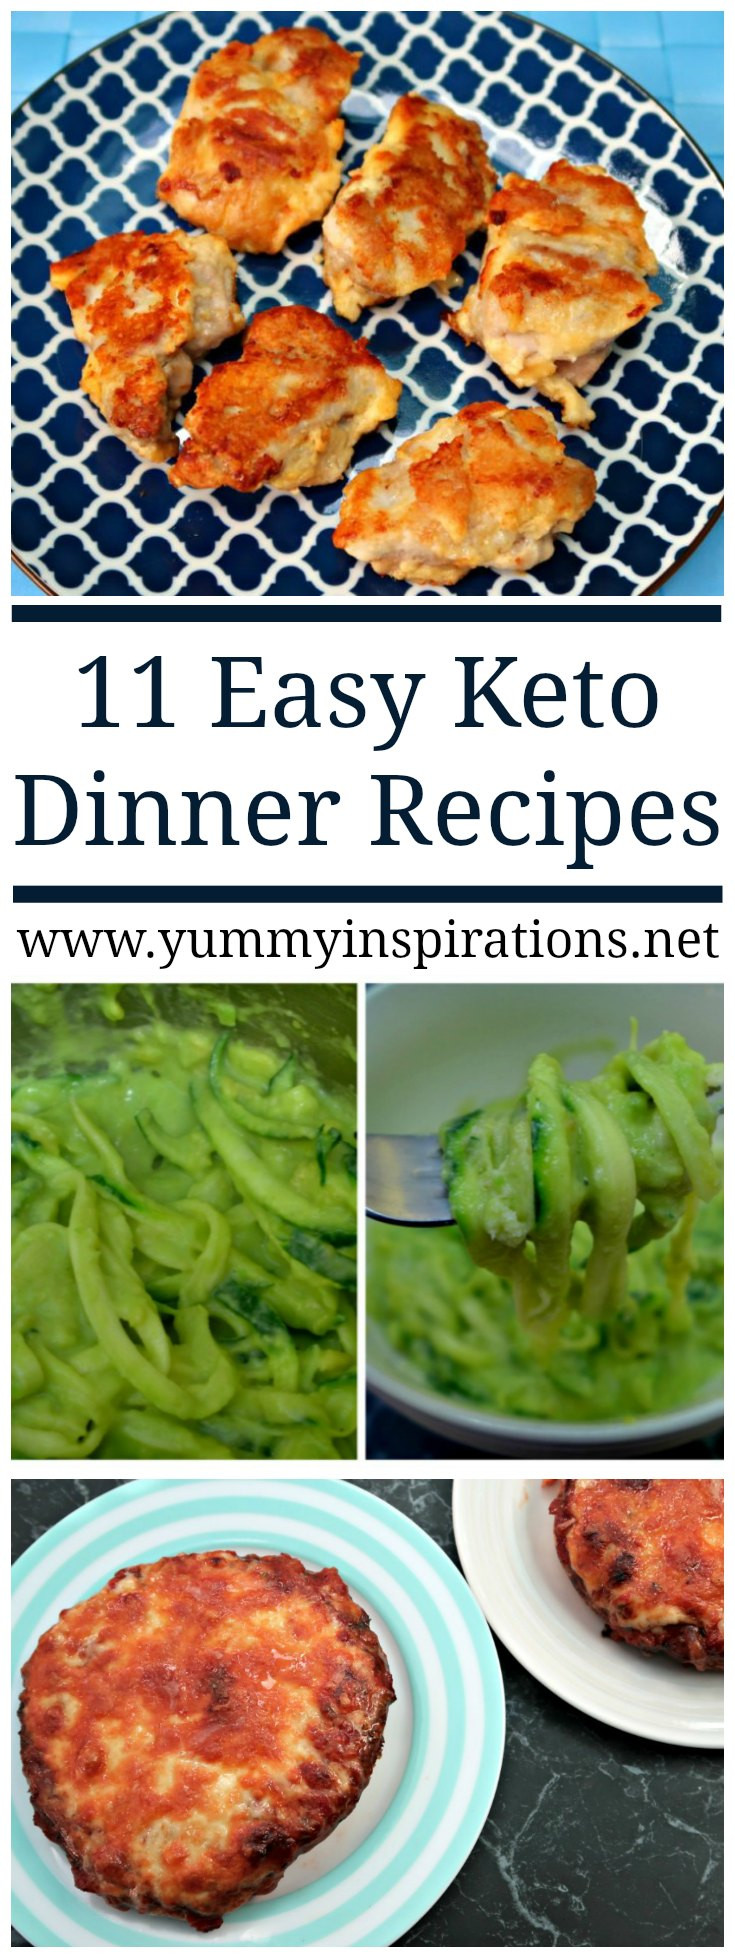 Easy Keto Dinner Recipes
 11 Easy Keto Dinner Recipes Quick Low Carb Ketogenic